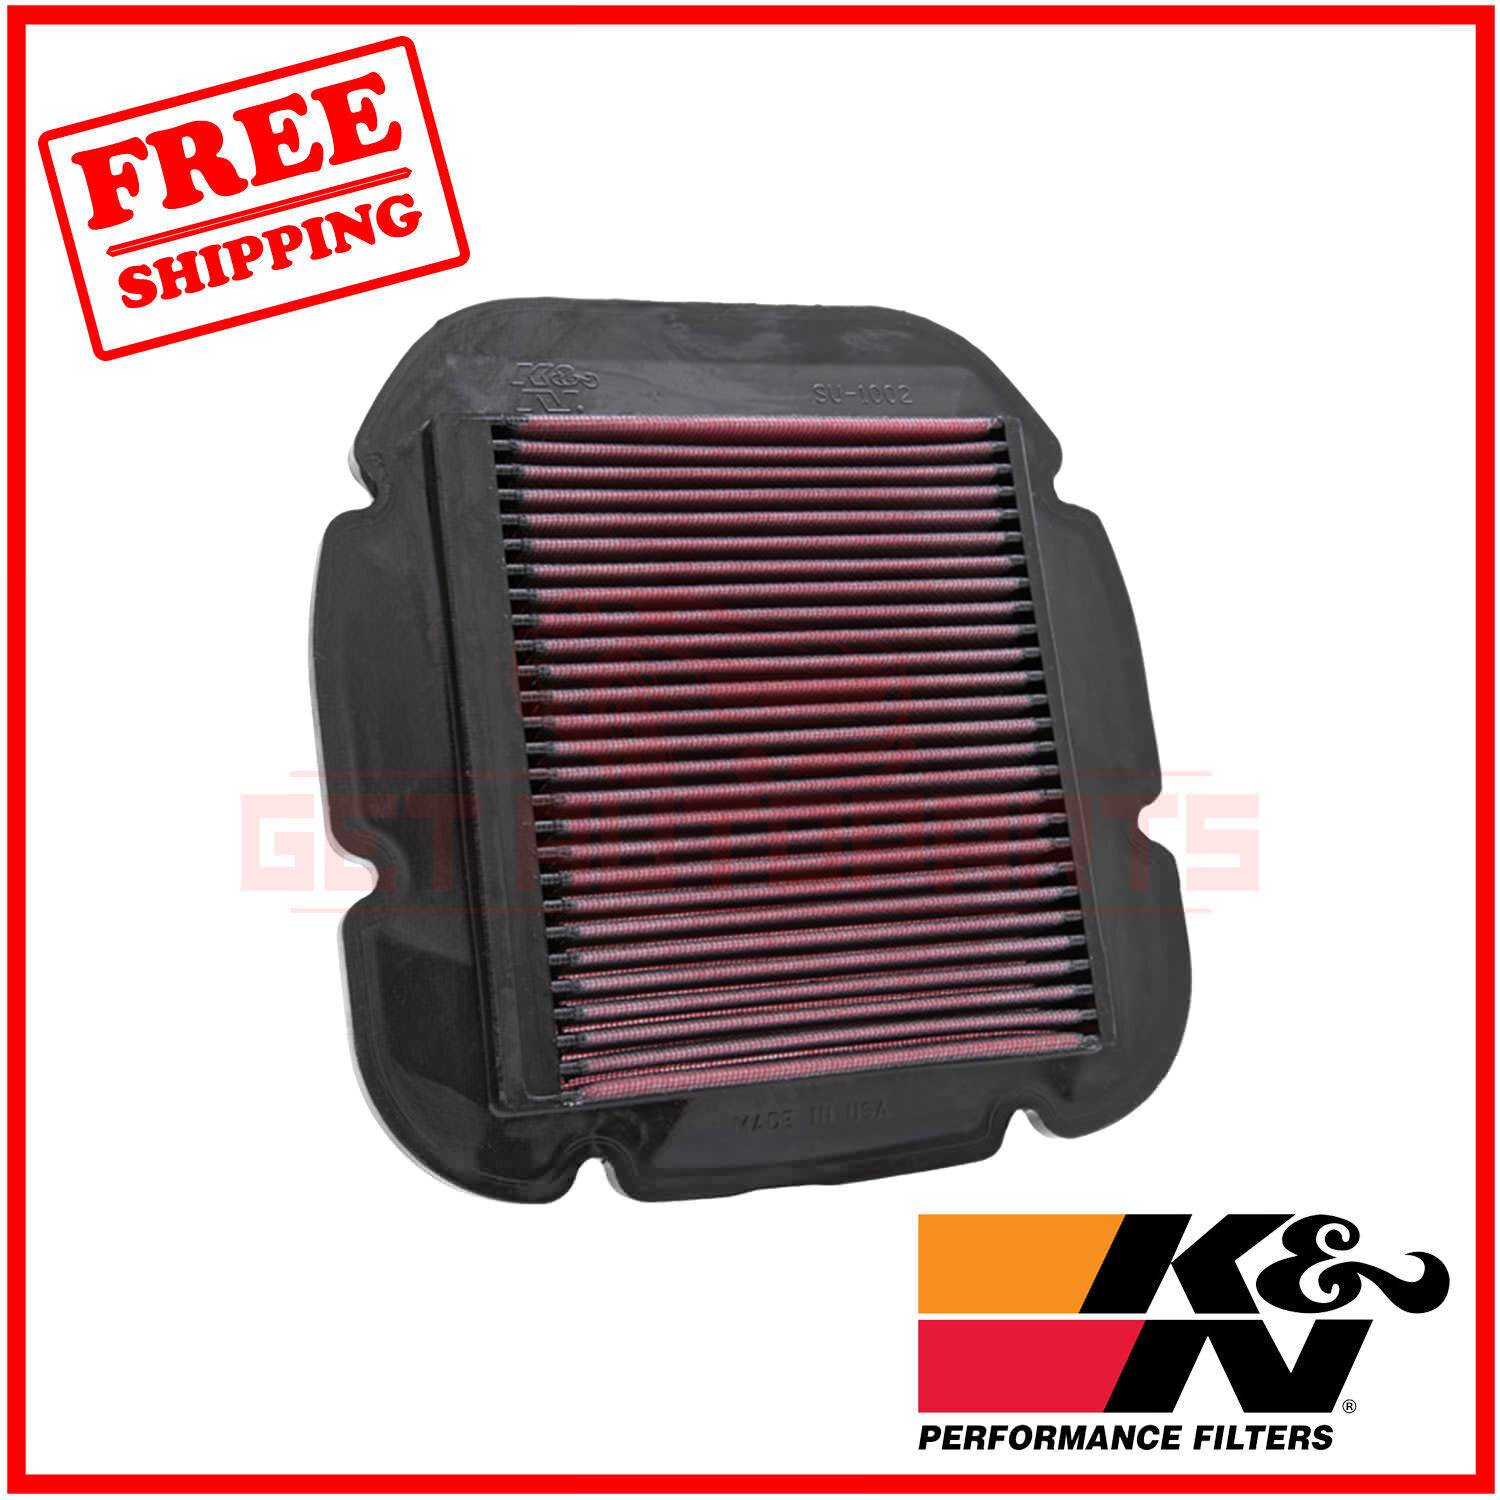 K&N Replacement Air Filter for Suzuki DL650A V-Strom XT ABS 2015-2018